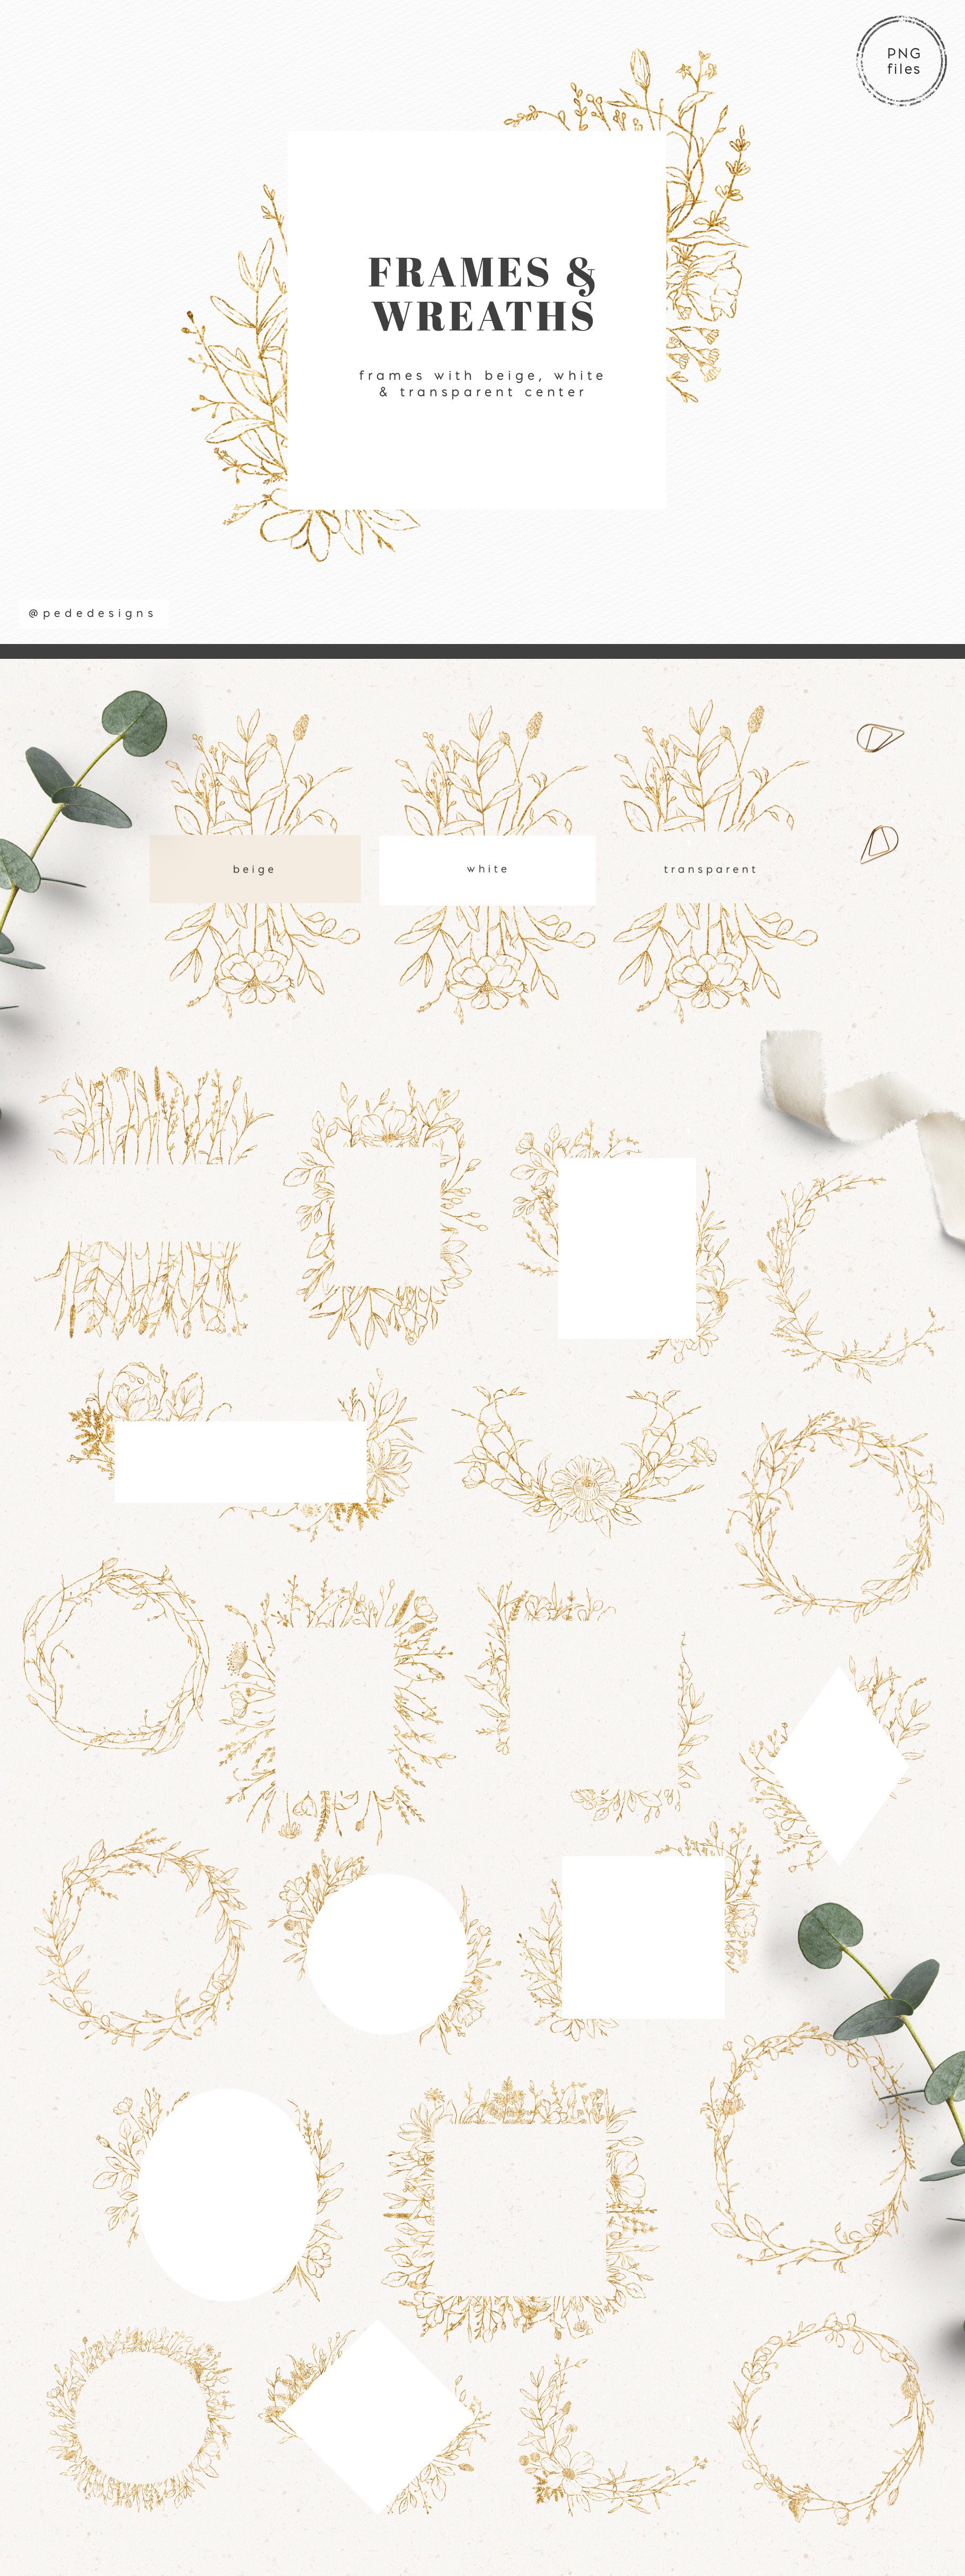 Gold wild flowers wreathes and frames.